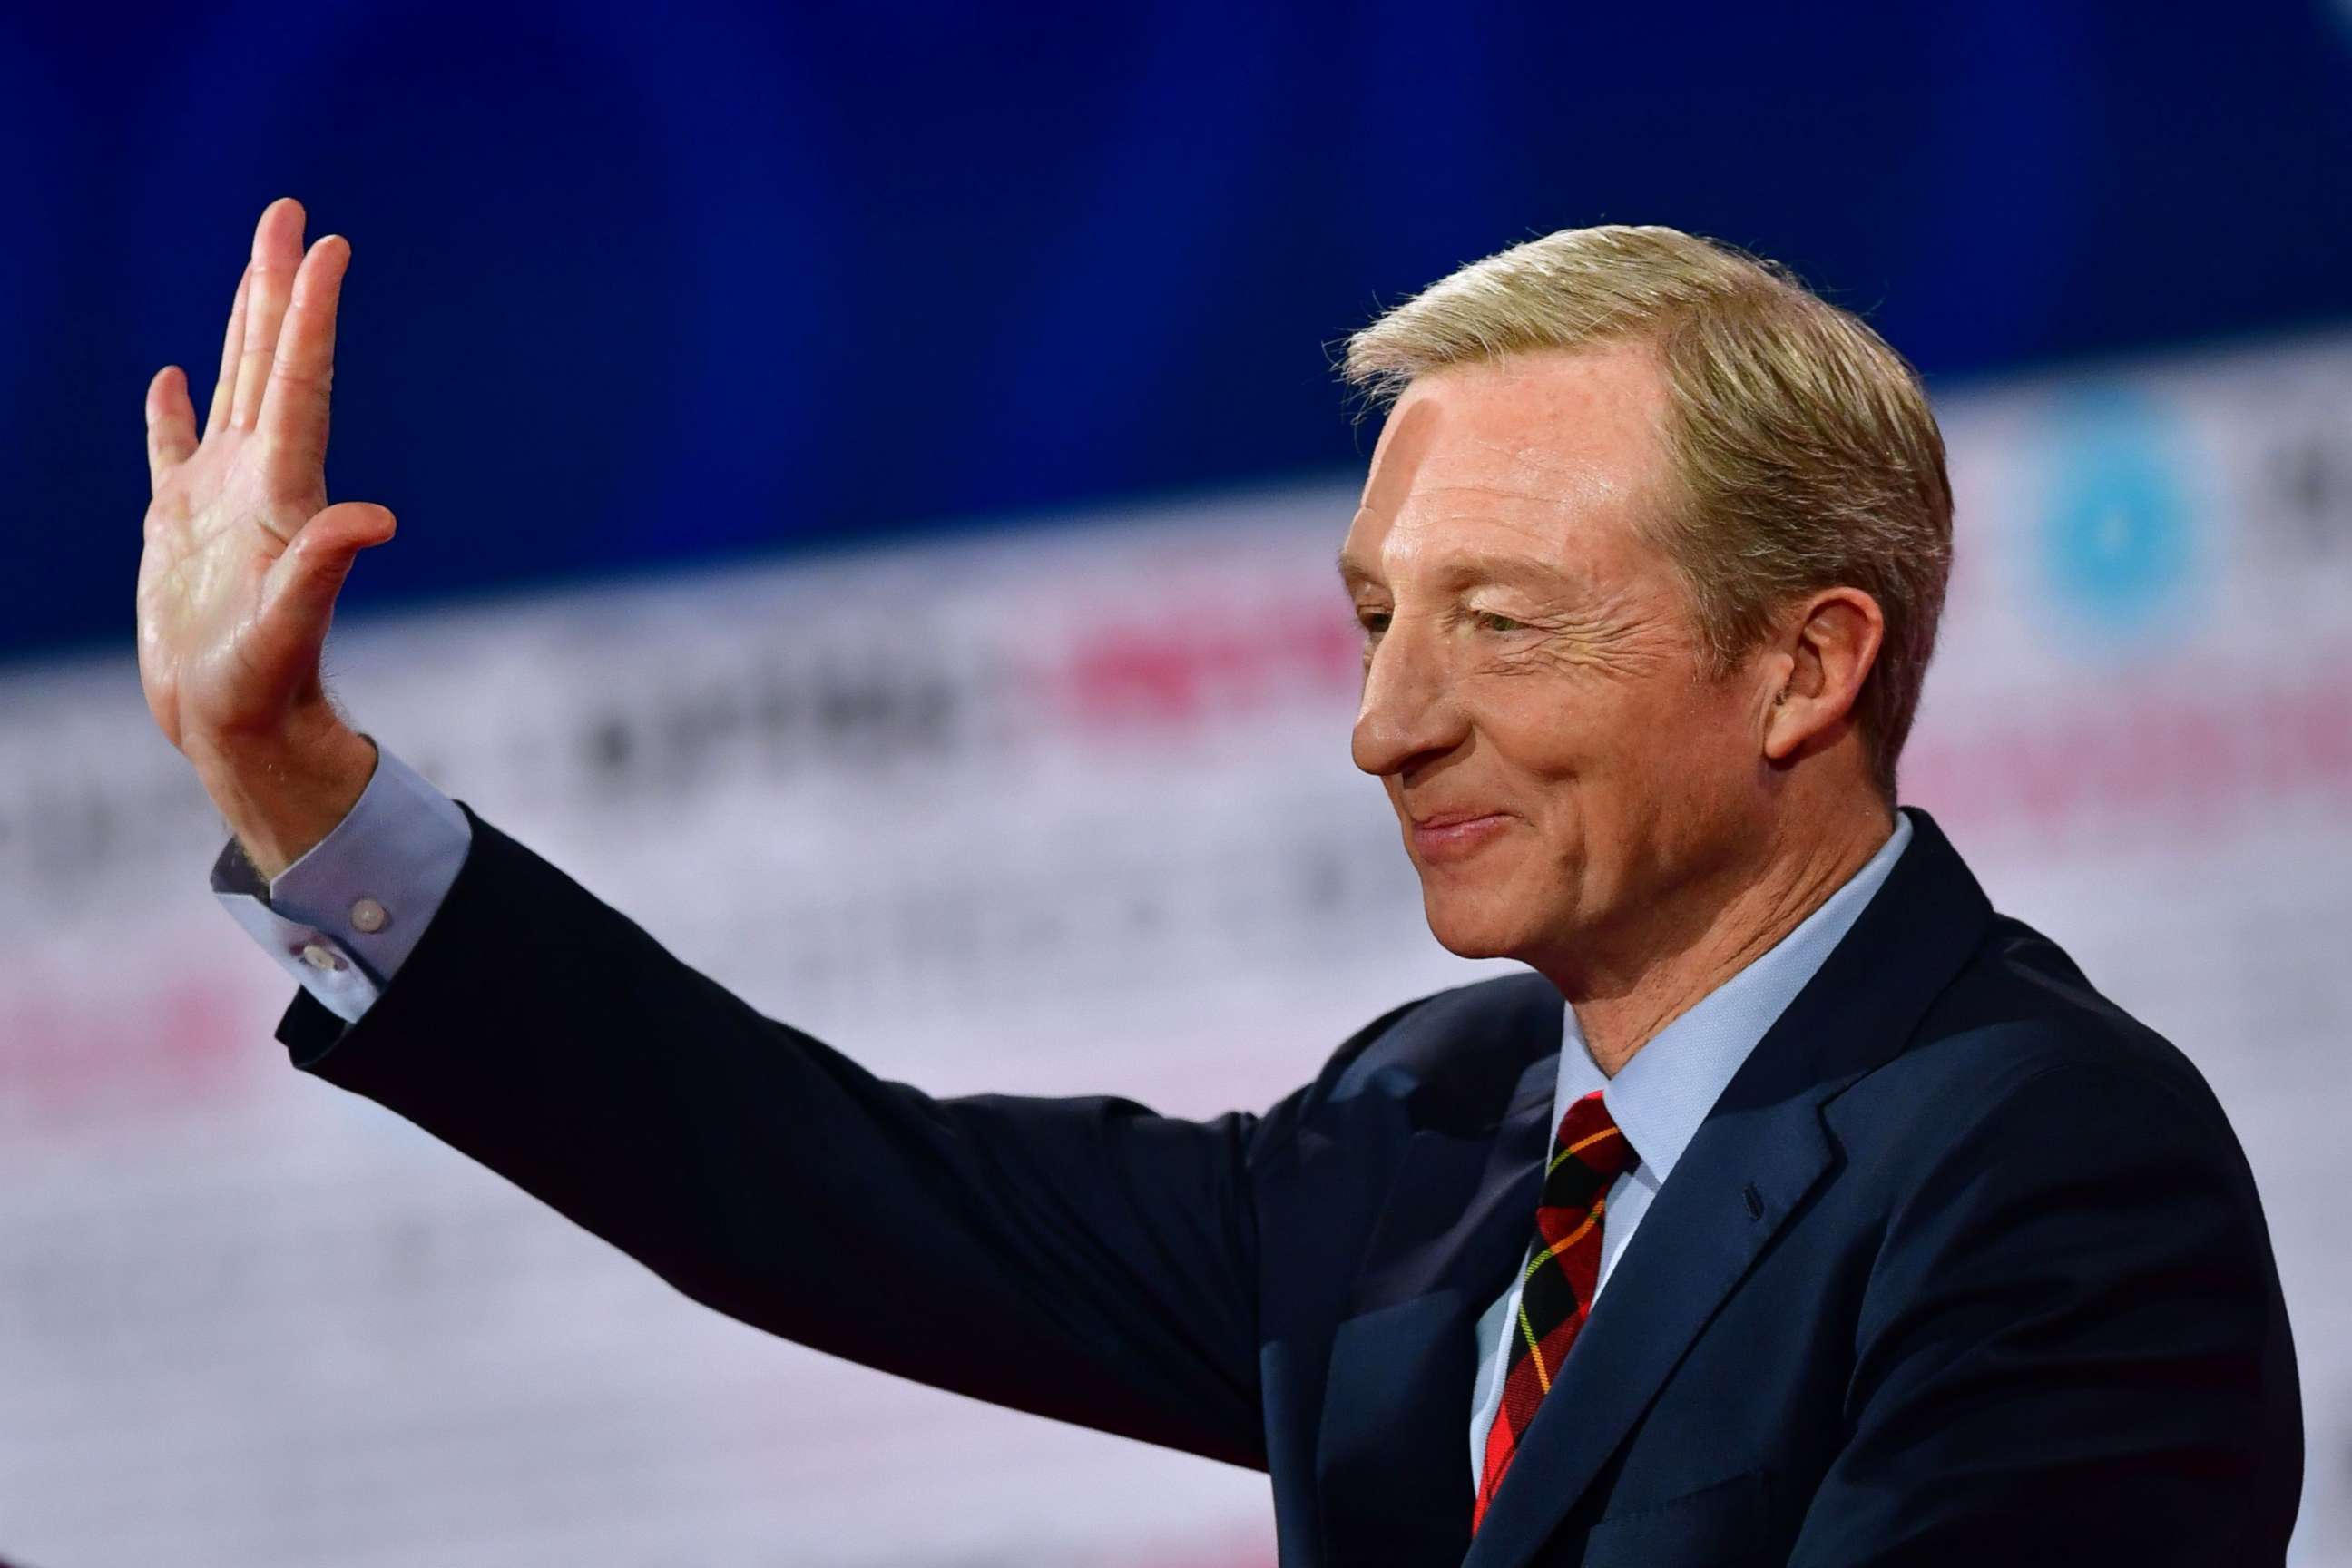 PHOTO: Democratic presidential hopeful businessman Tom Steyer waves ahead of the sixth Democratic primary debate of the 2020 presidential campaign season co-hosted by PBS NewsHour & Politico at Loyola Marymount University in Los Angeles, Dec. 19, 2019.